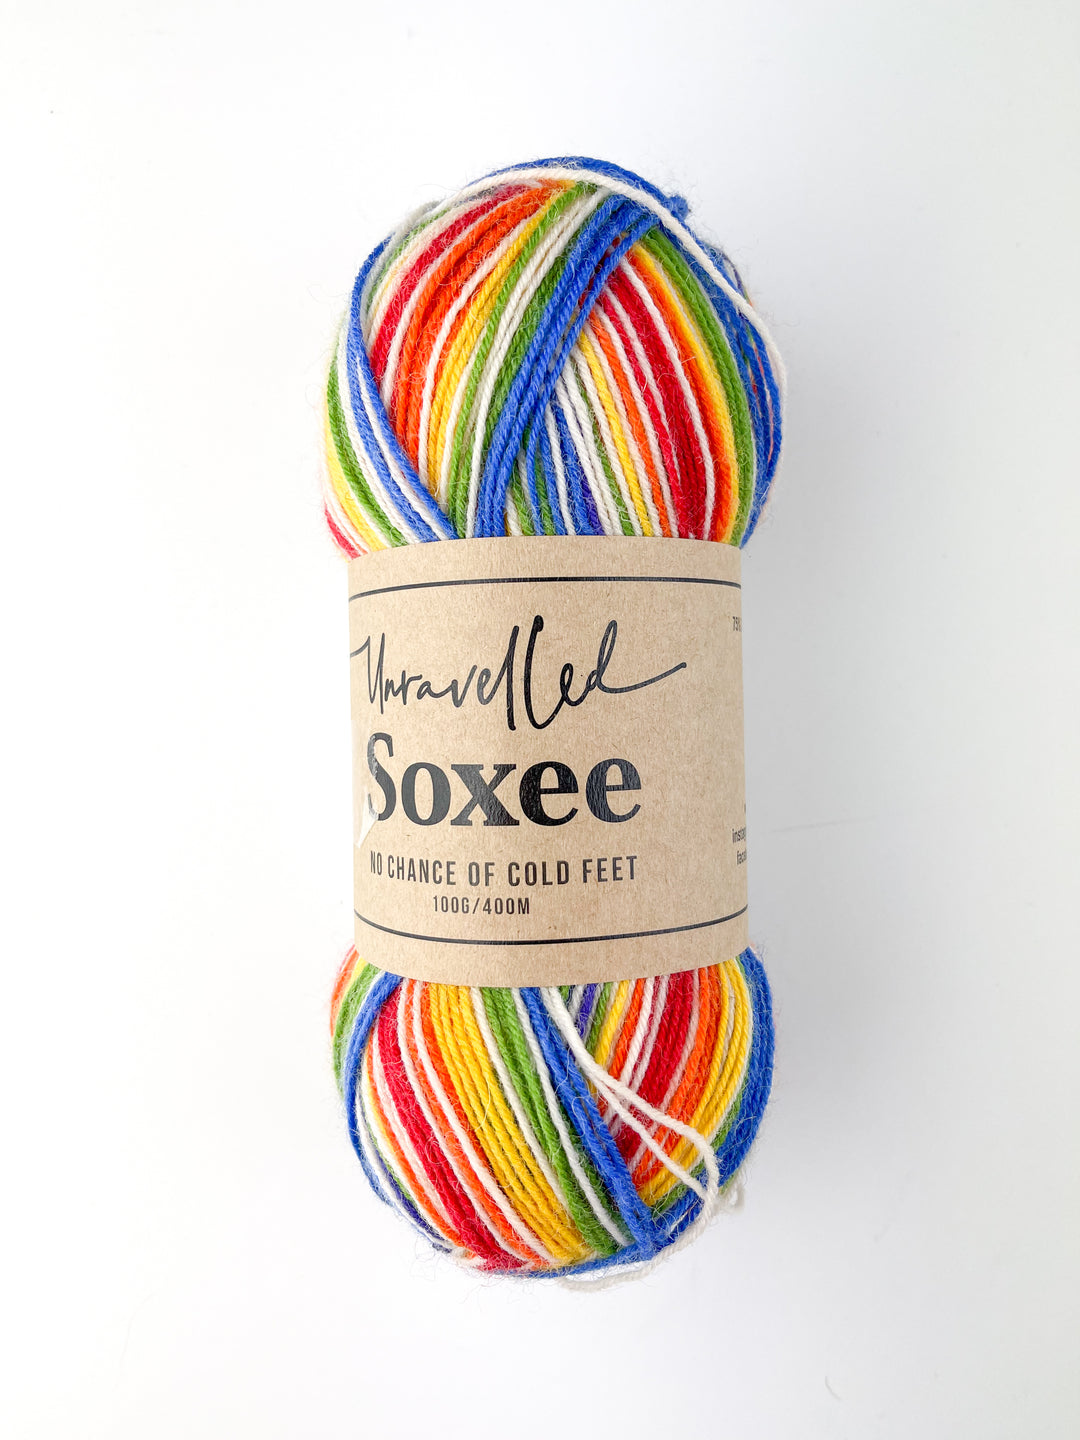 Unravelled Soxee Wool Blend